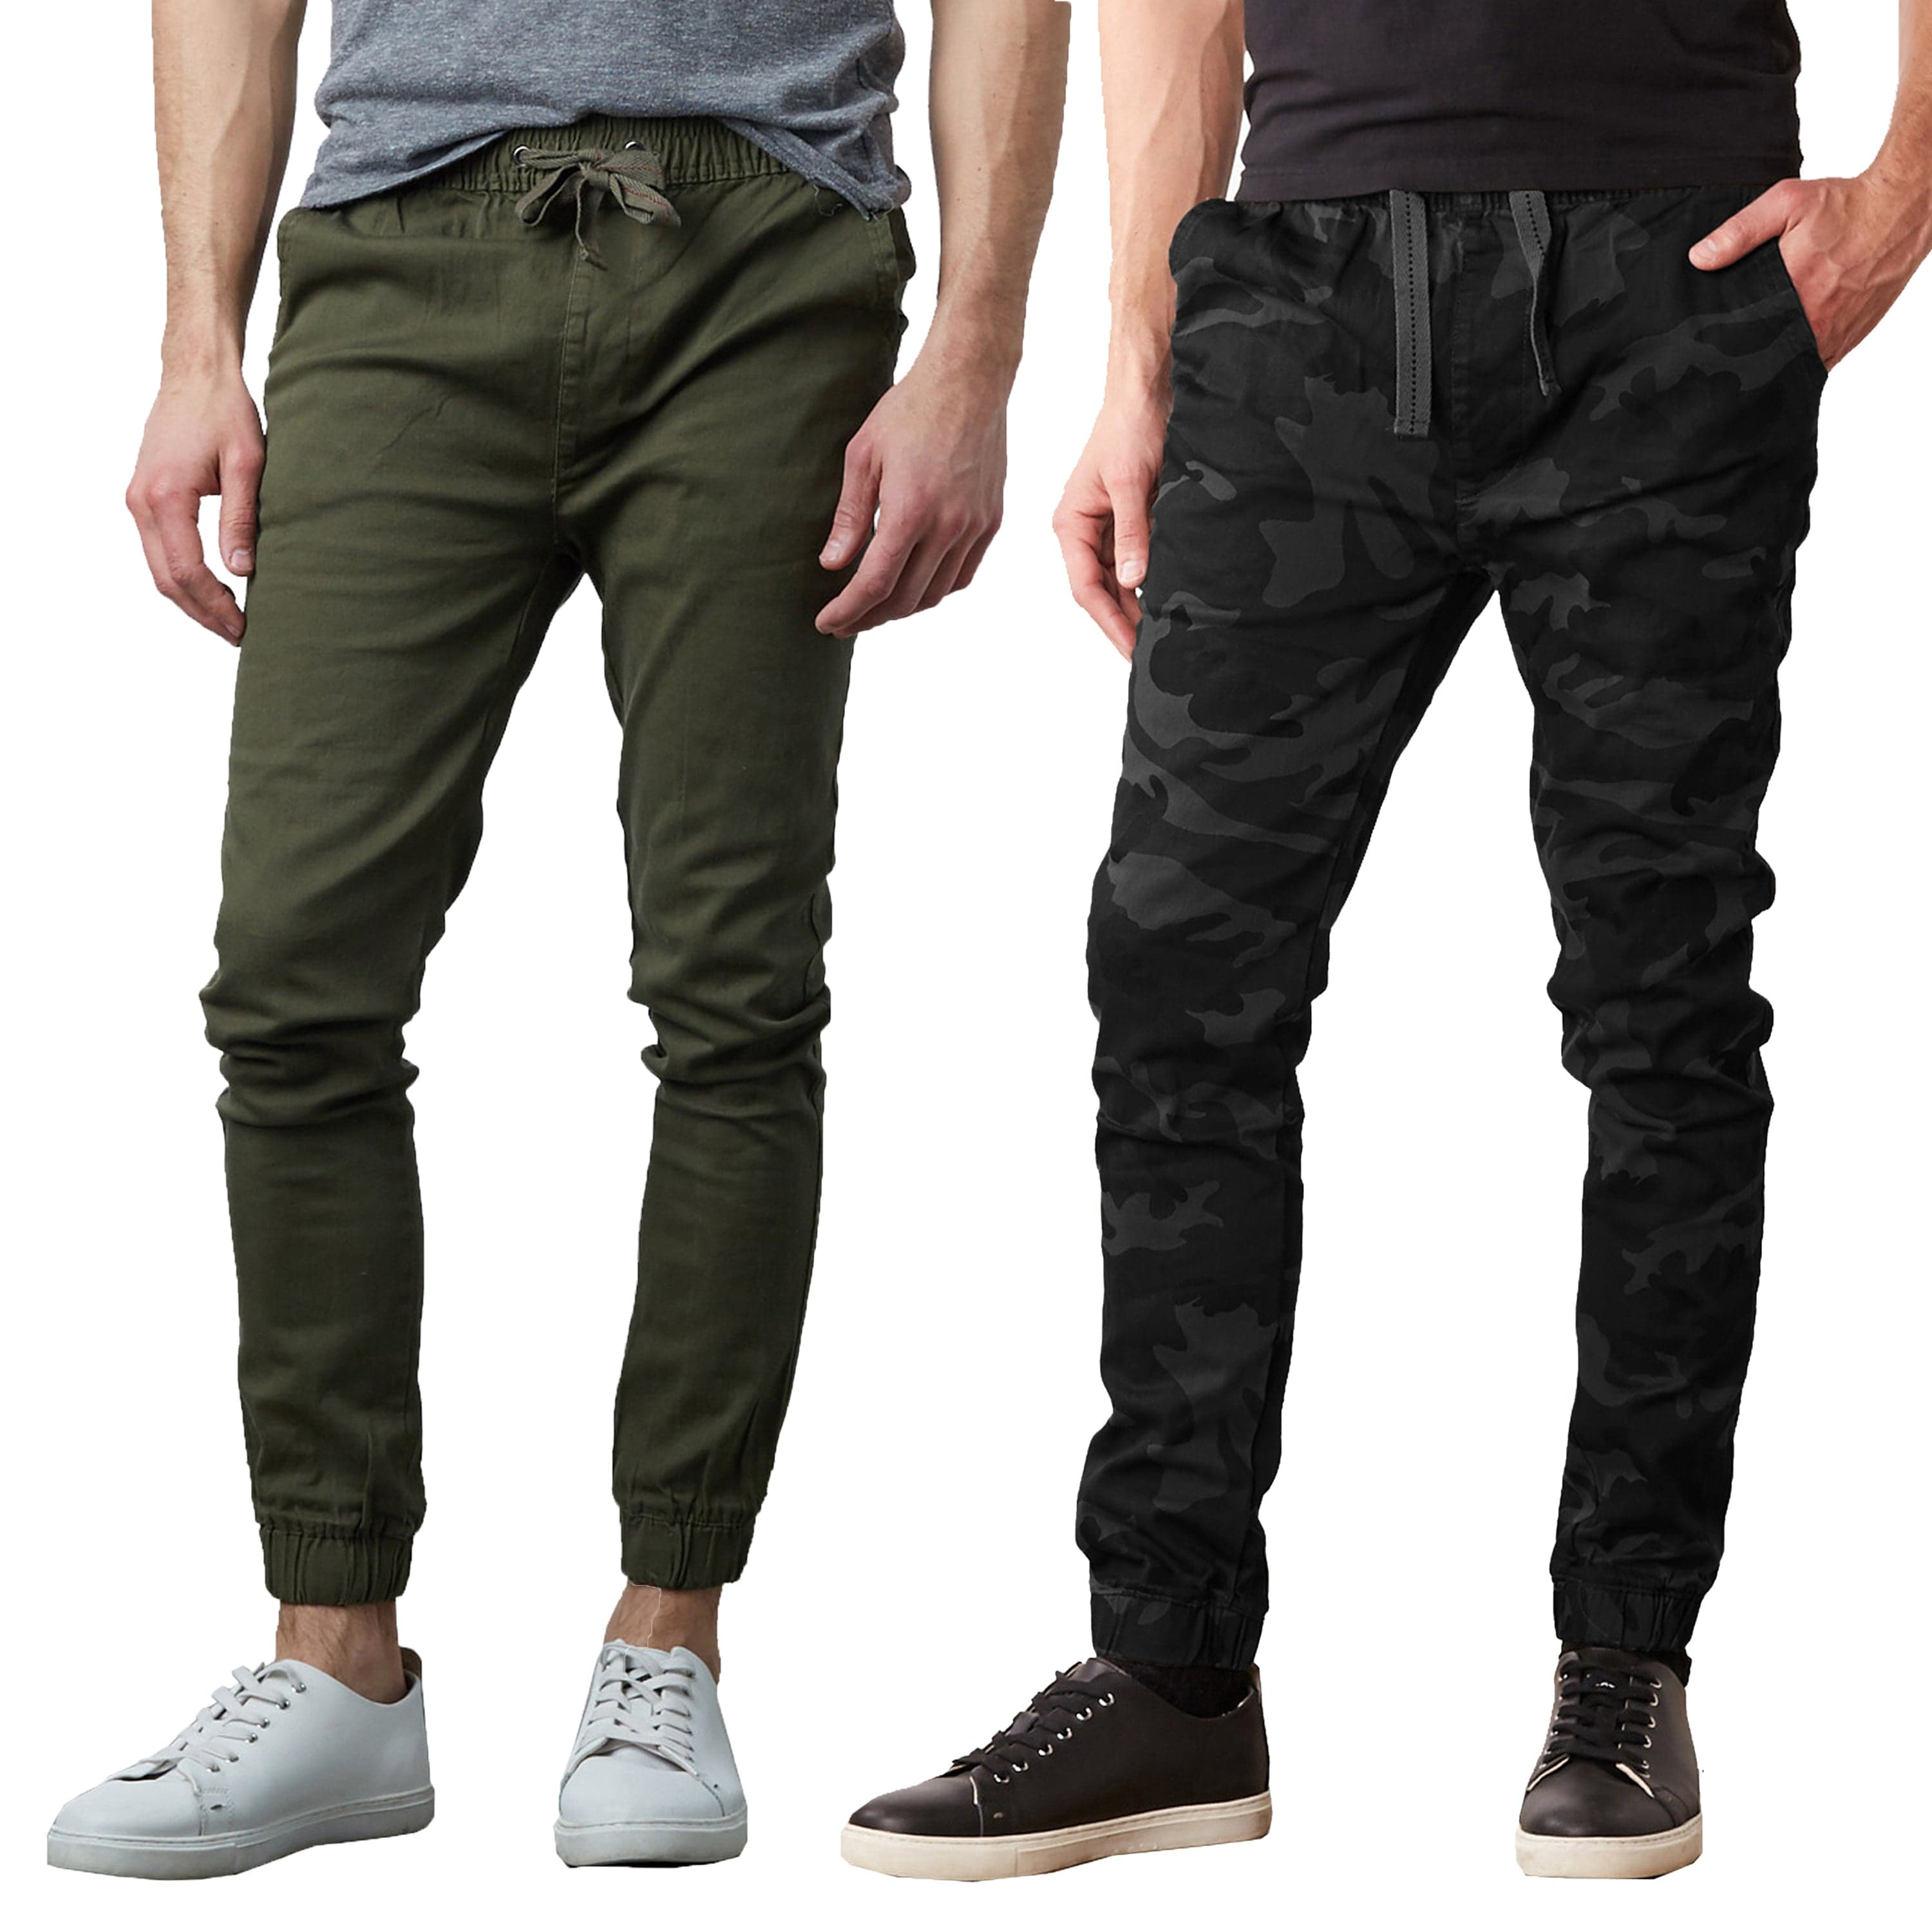 Men's 2-Pack Classic Cotton Stretch Twill Jogger Pants